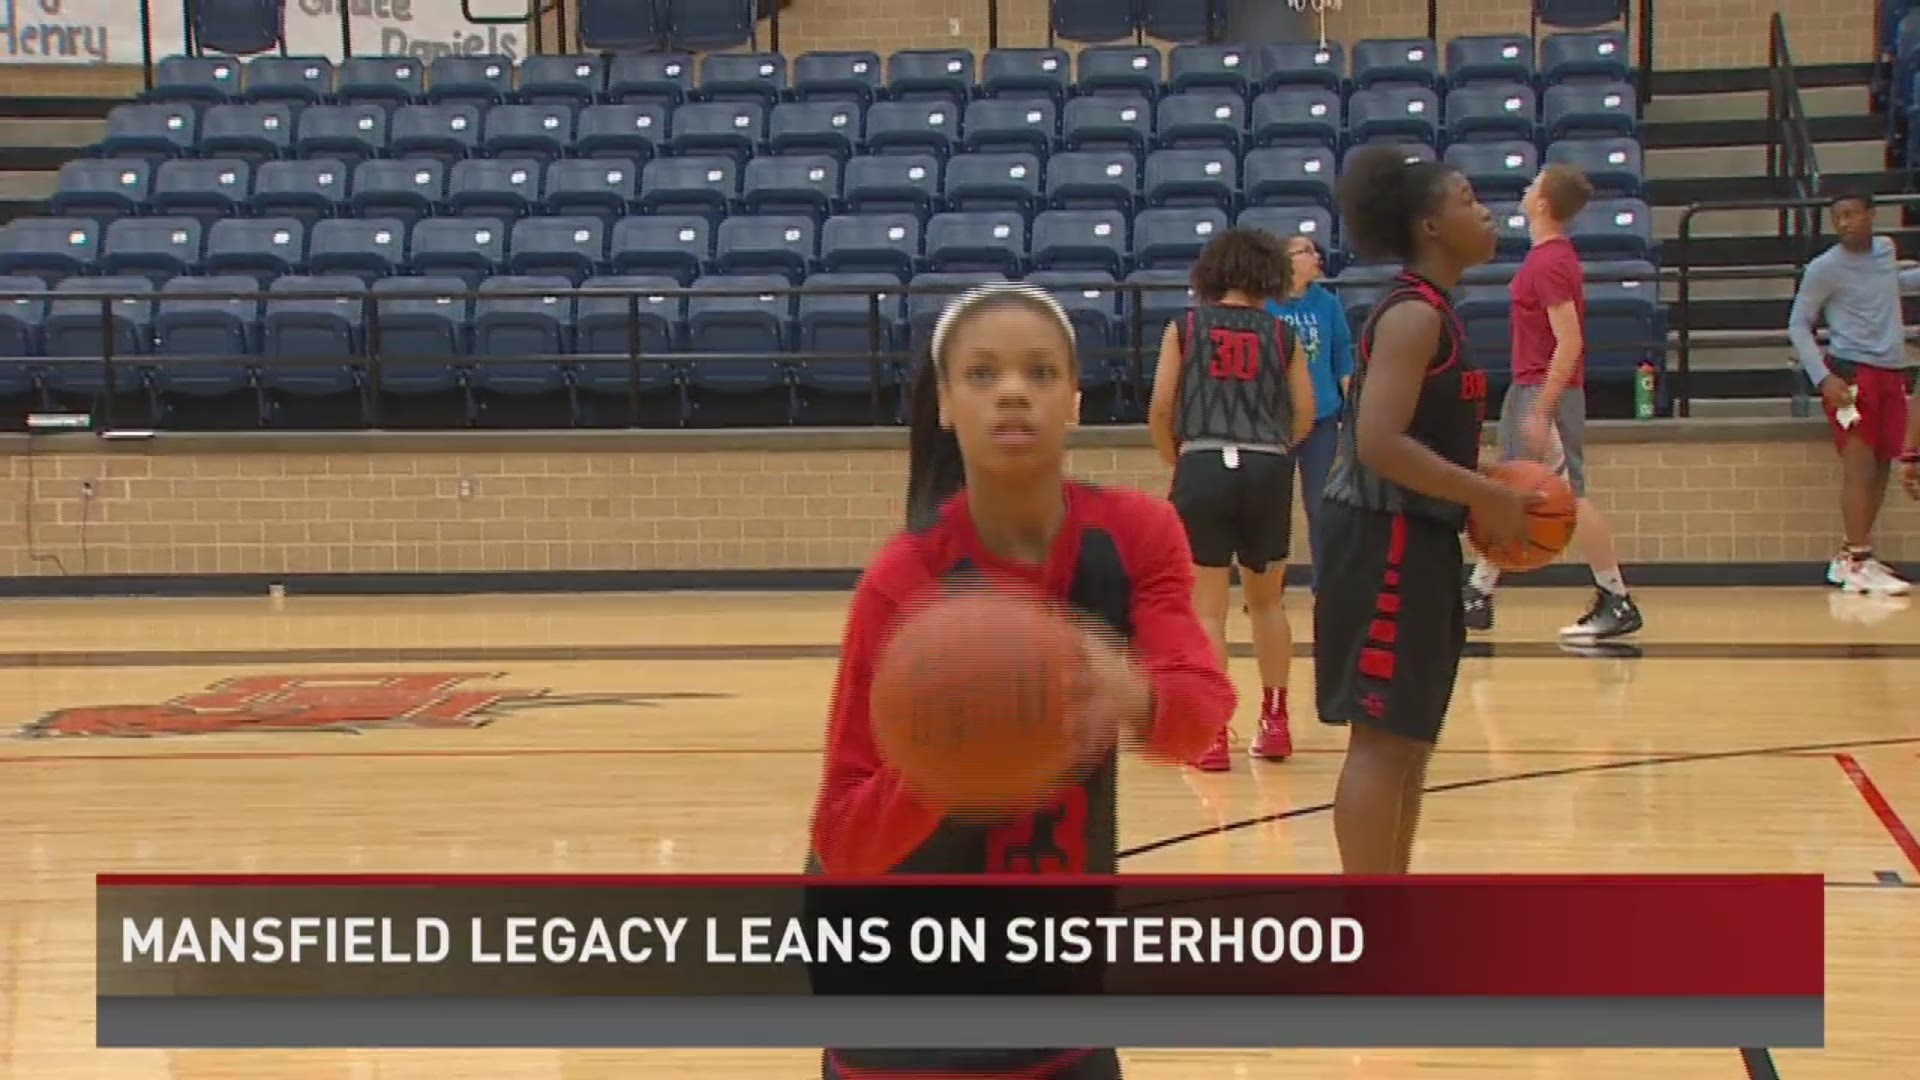 Lyric and Harmoni Turner learn to get along on the court as sisterhood grows on the Mansfield Legacy basketball team.